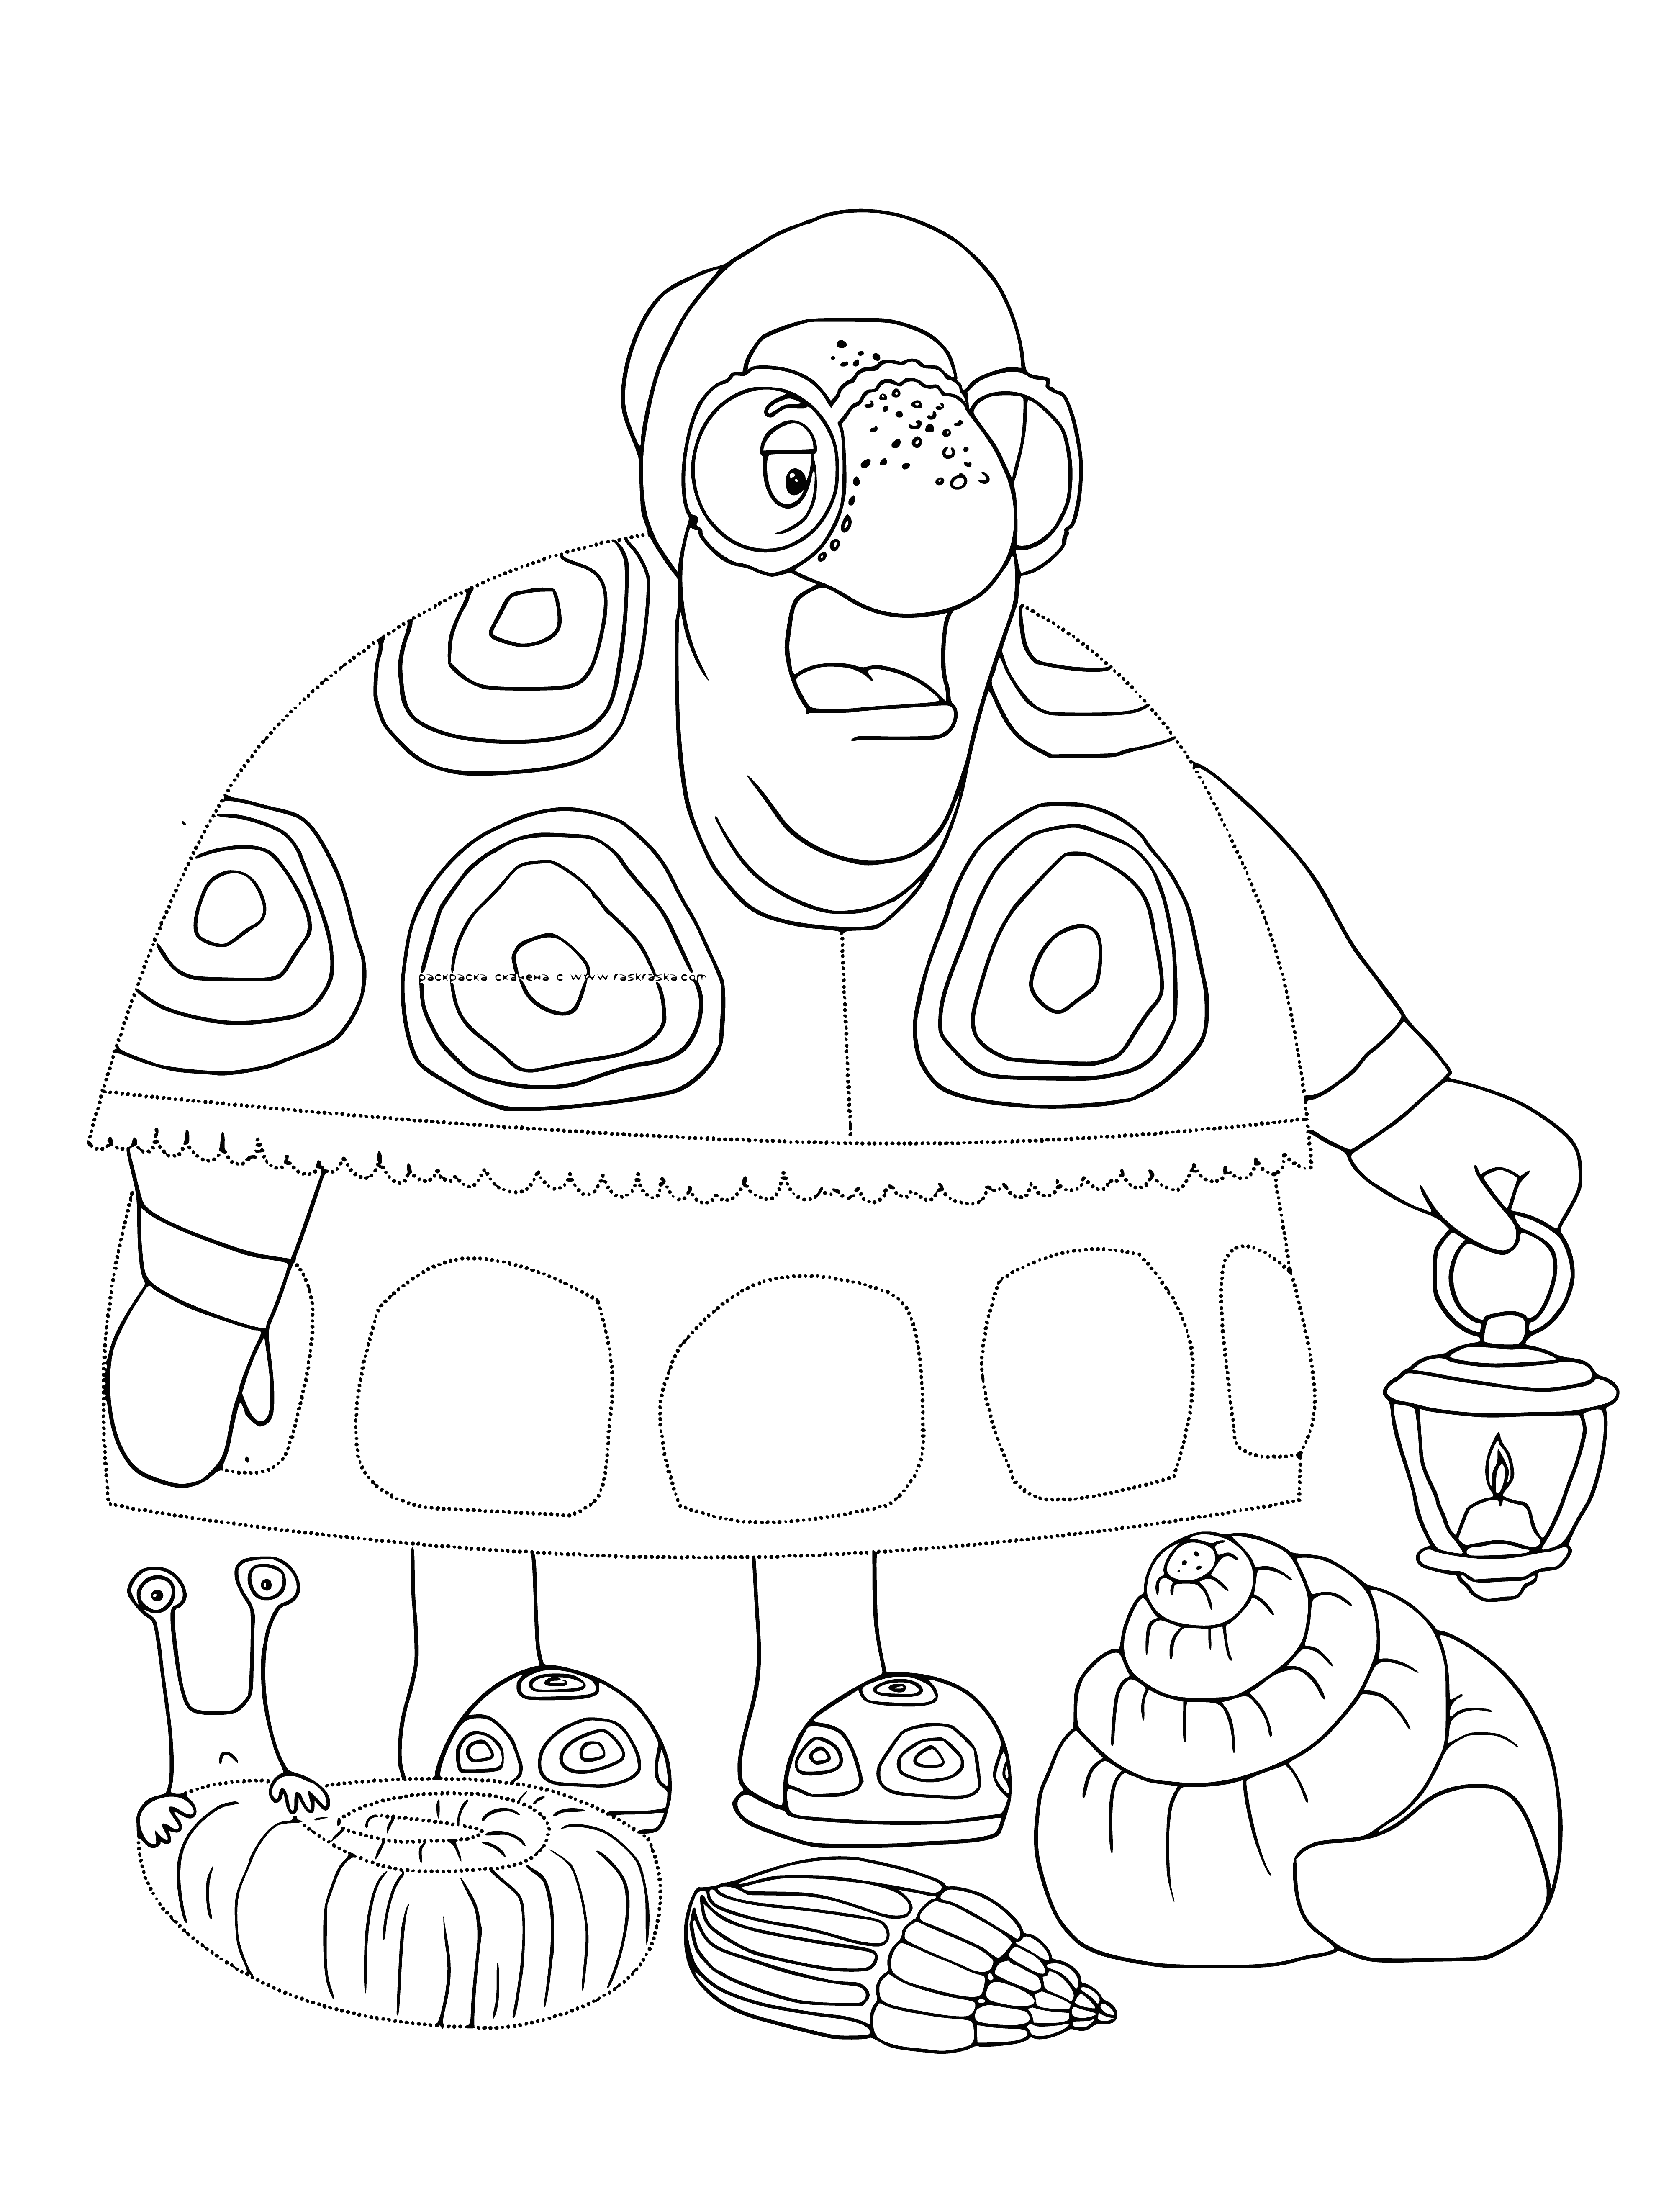 coloring page: Luntik stands on a turtle with friends, two small blue creatures with big eyes and small noses.